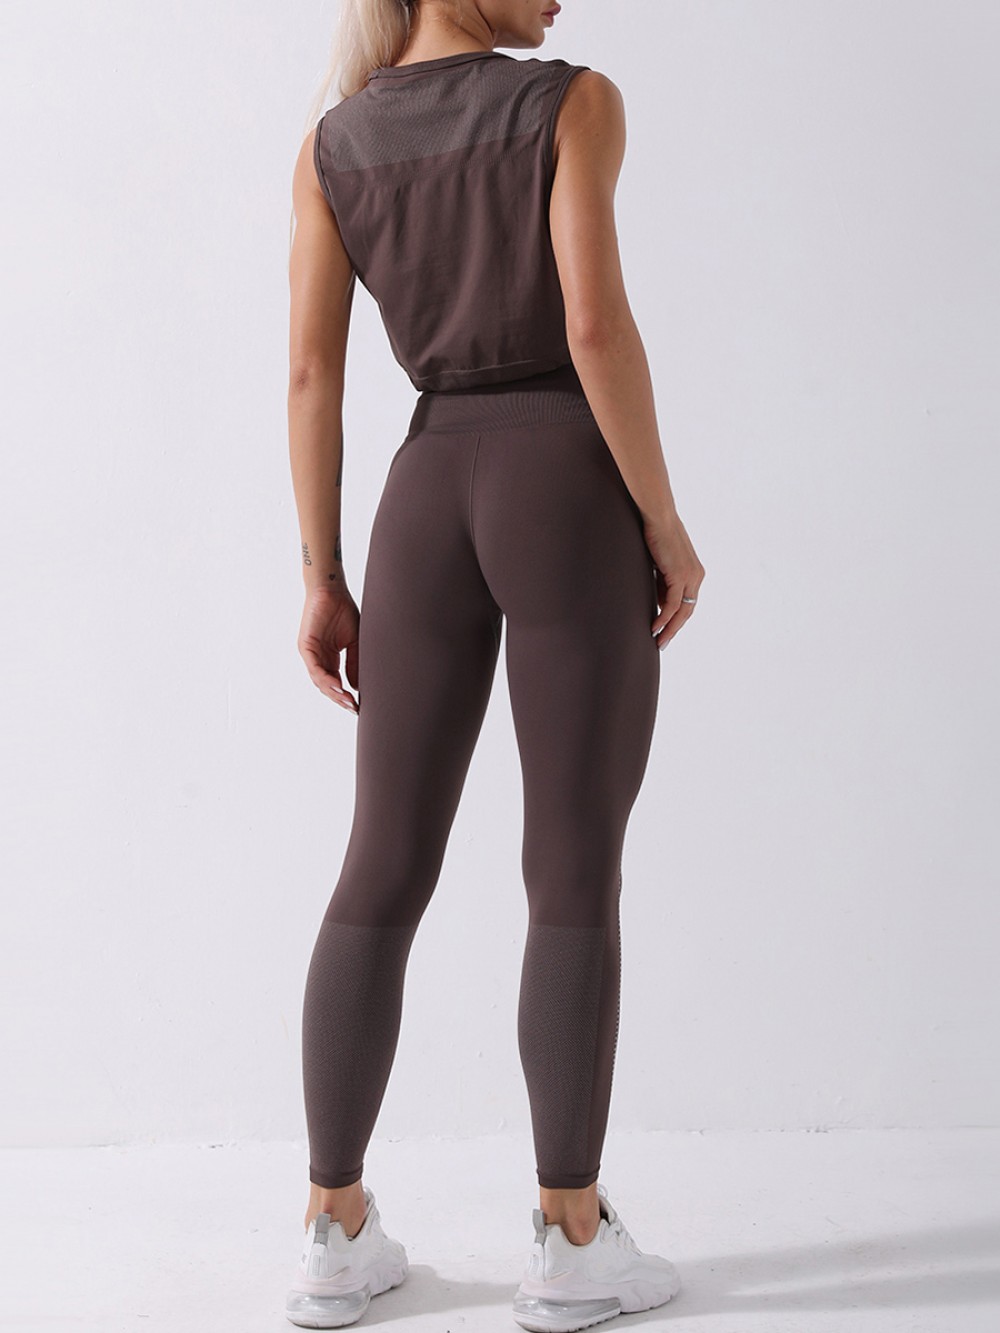 Coffee Color Yoga Suit Seamless Spot Paint Drawstring Ladies Activewear